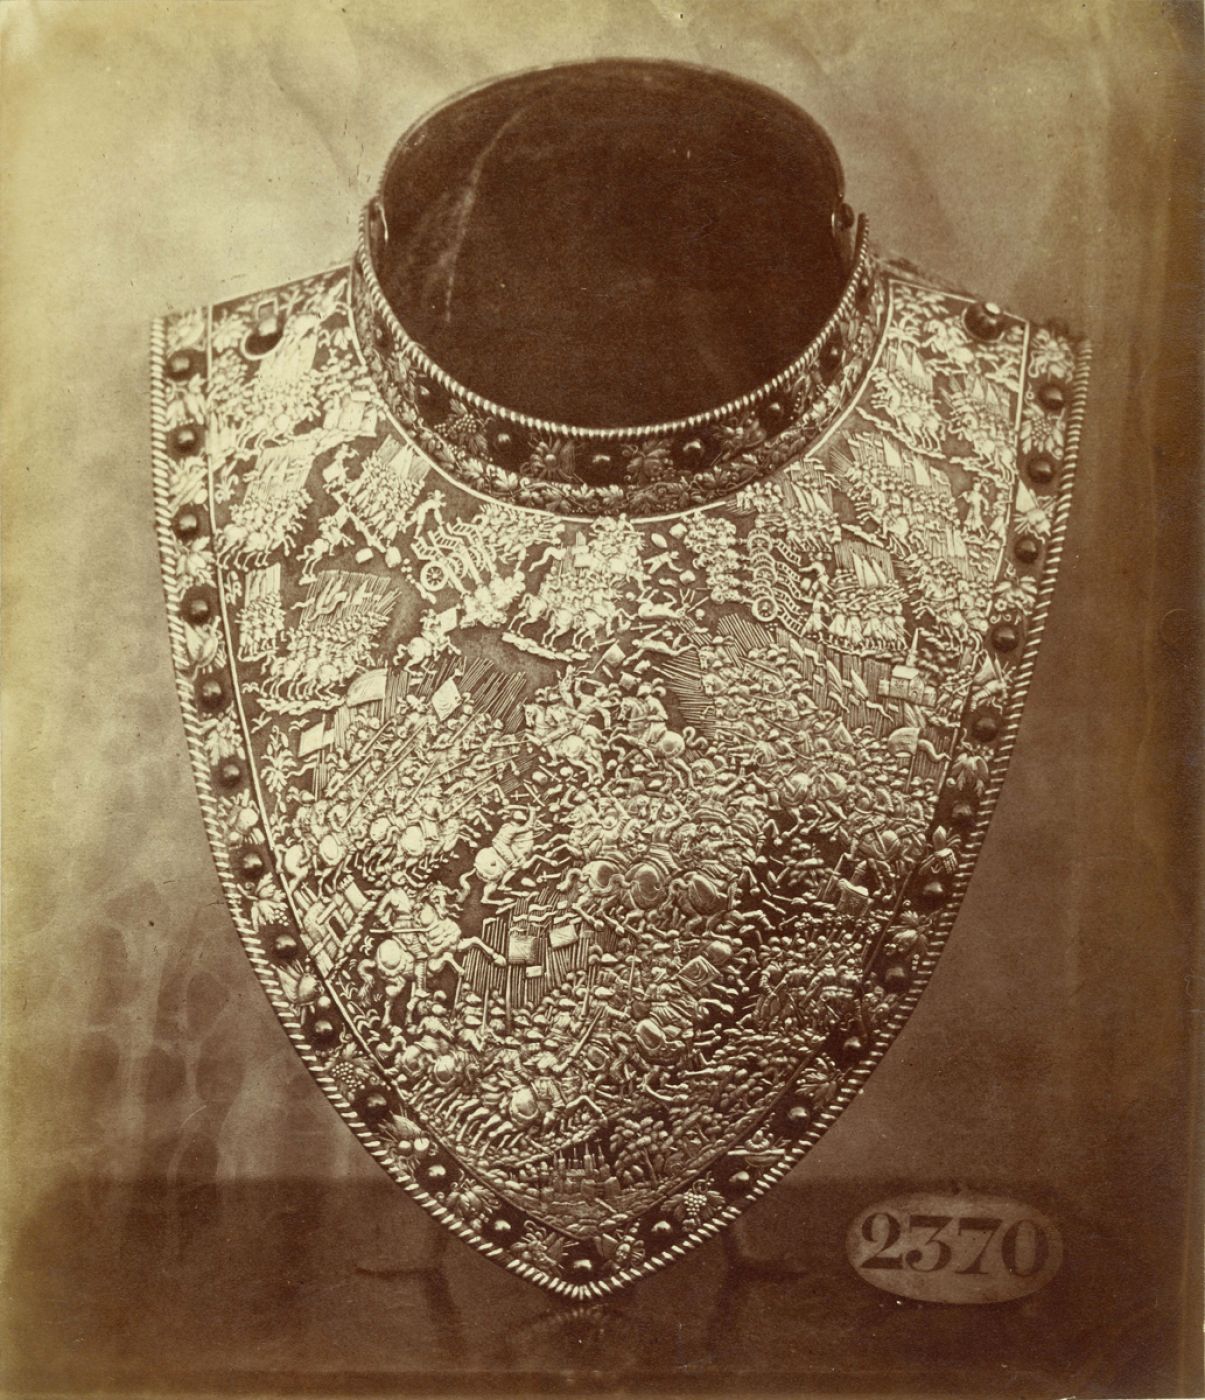 Jean Laurent, “Gorget of the armour of King Philip II”, 1870 ca.